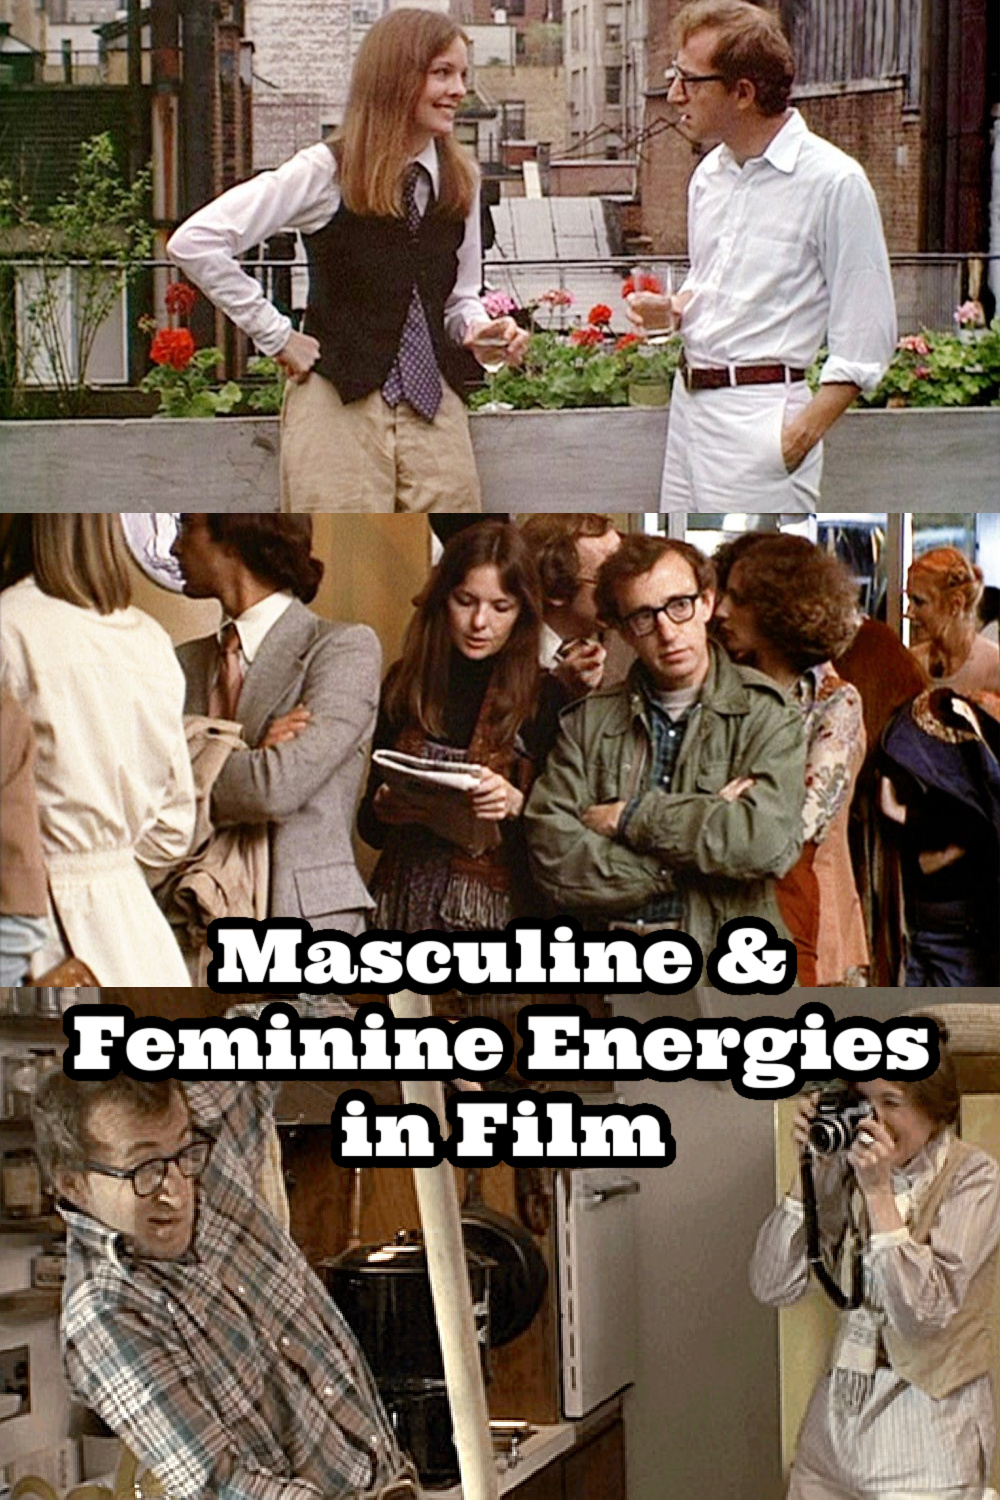 wounded feminine energy, wounded masculine and feminine energy, wounded feminine energy in a man, wounded feminine energy in a female, wounded masculine energy, annie hall review, wounded masculine and feminine polarity, narcissistic characters in movies, wounded masculine energy narcissism, the covert narcissist in relationships, wounded feminine energy traits, signs of a covert narcissist boyfriend, covert narcissist in relationships, vulnerable narcissism abuse, trauma bonding narcissistic abuse, woody allen annie hall, sexual polarity masculine feminine, feminine and masculine energy in relationships, difference between feminine and masculine energy, understanding masculine and feminine energy, Everyday starlet, sarah blodgett,